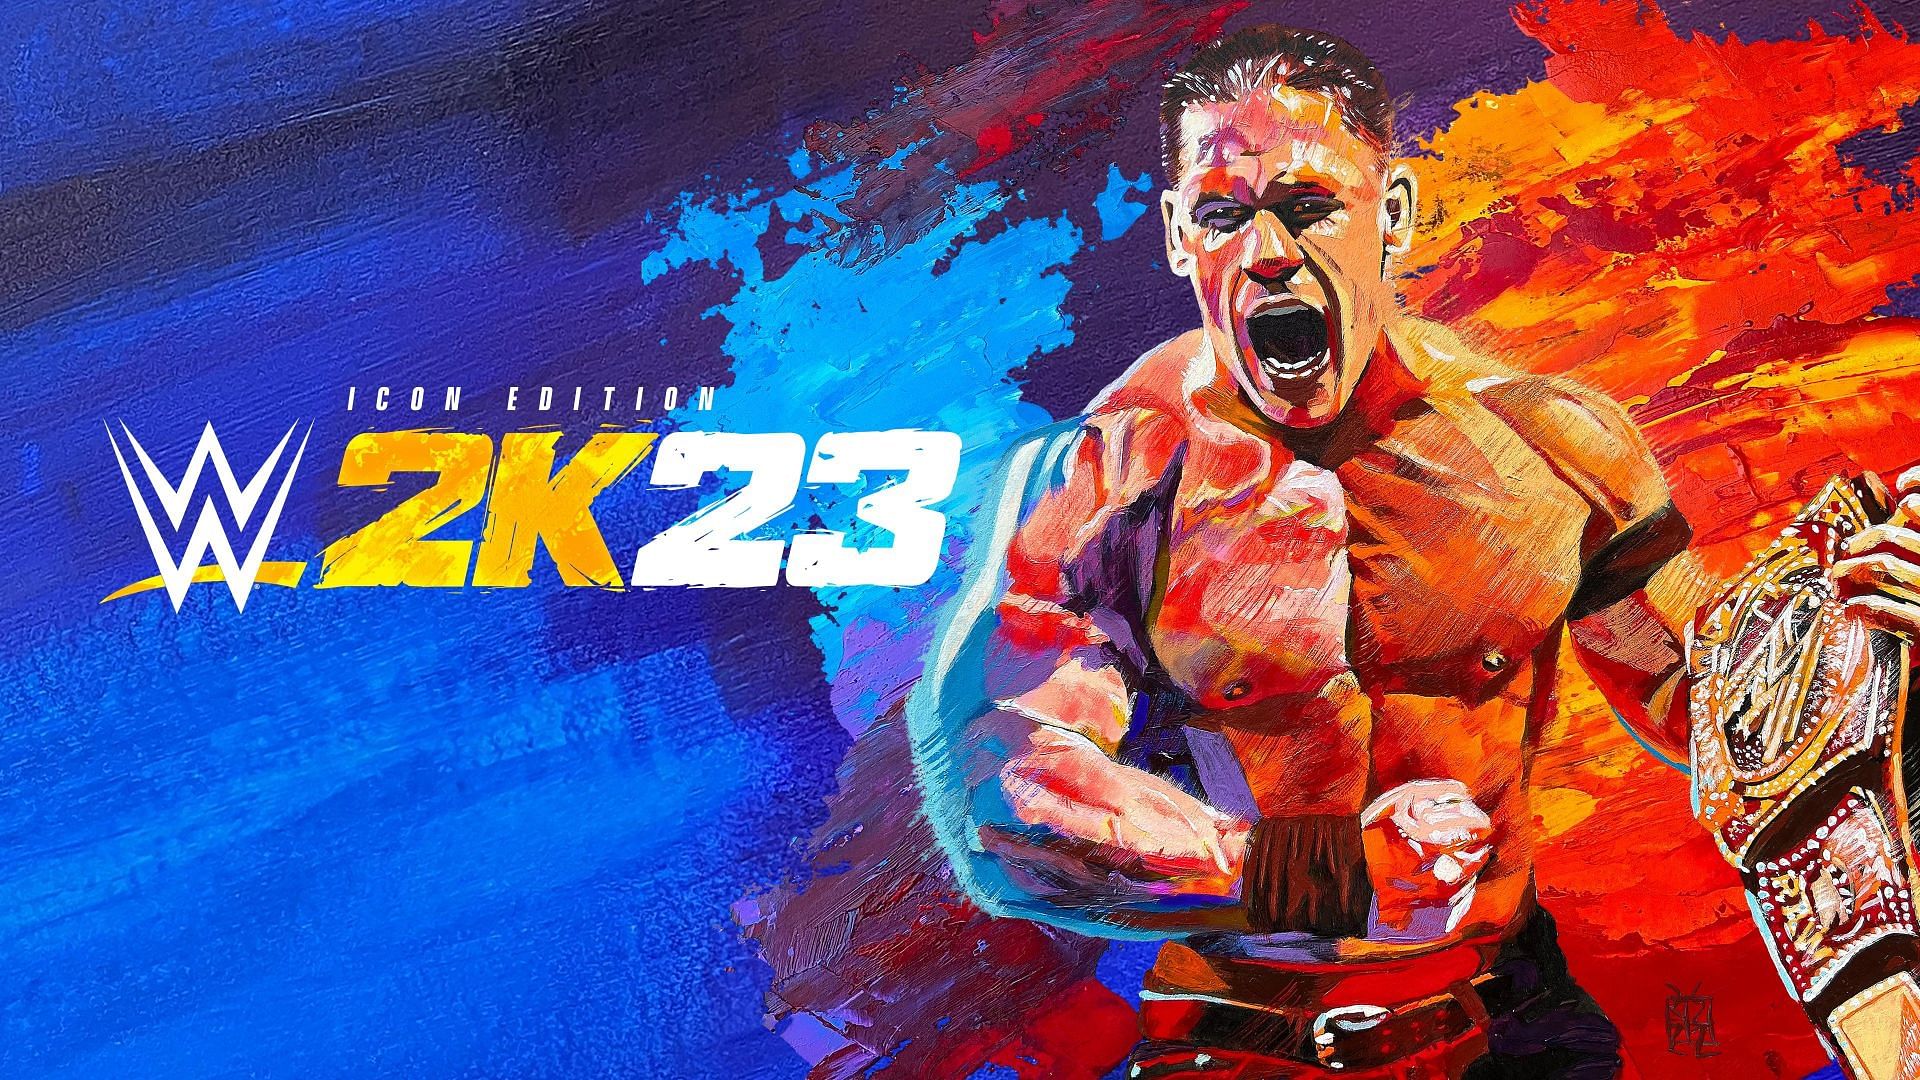 WWE 2K23 ratings are dropping fast and furious!